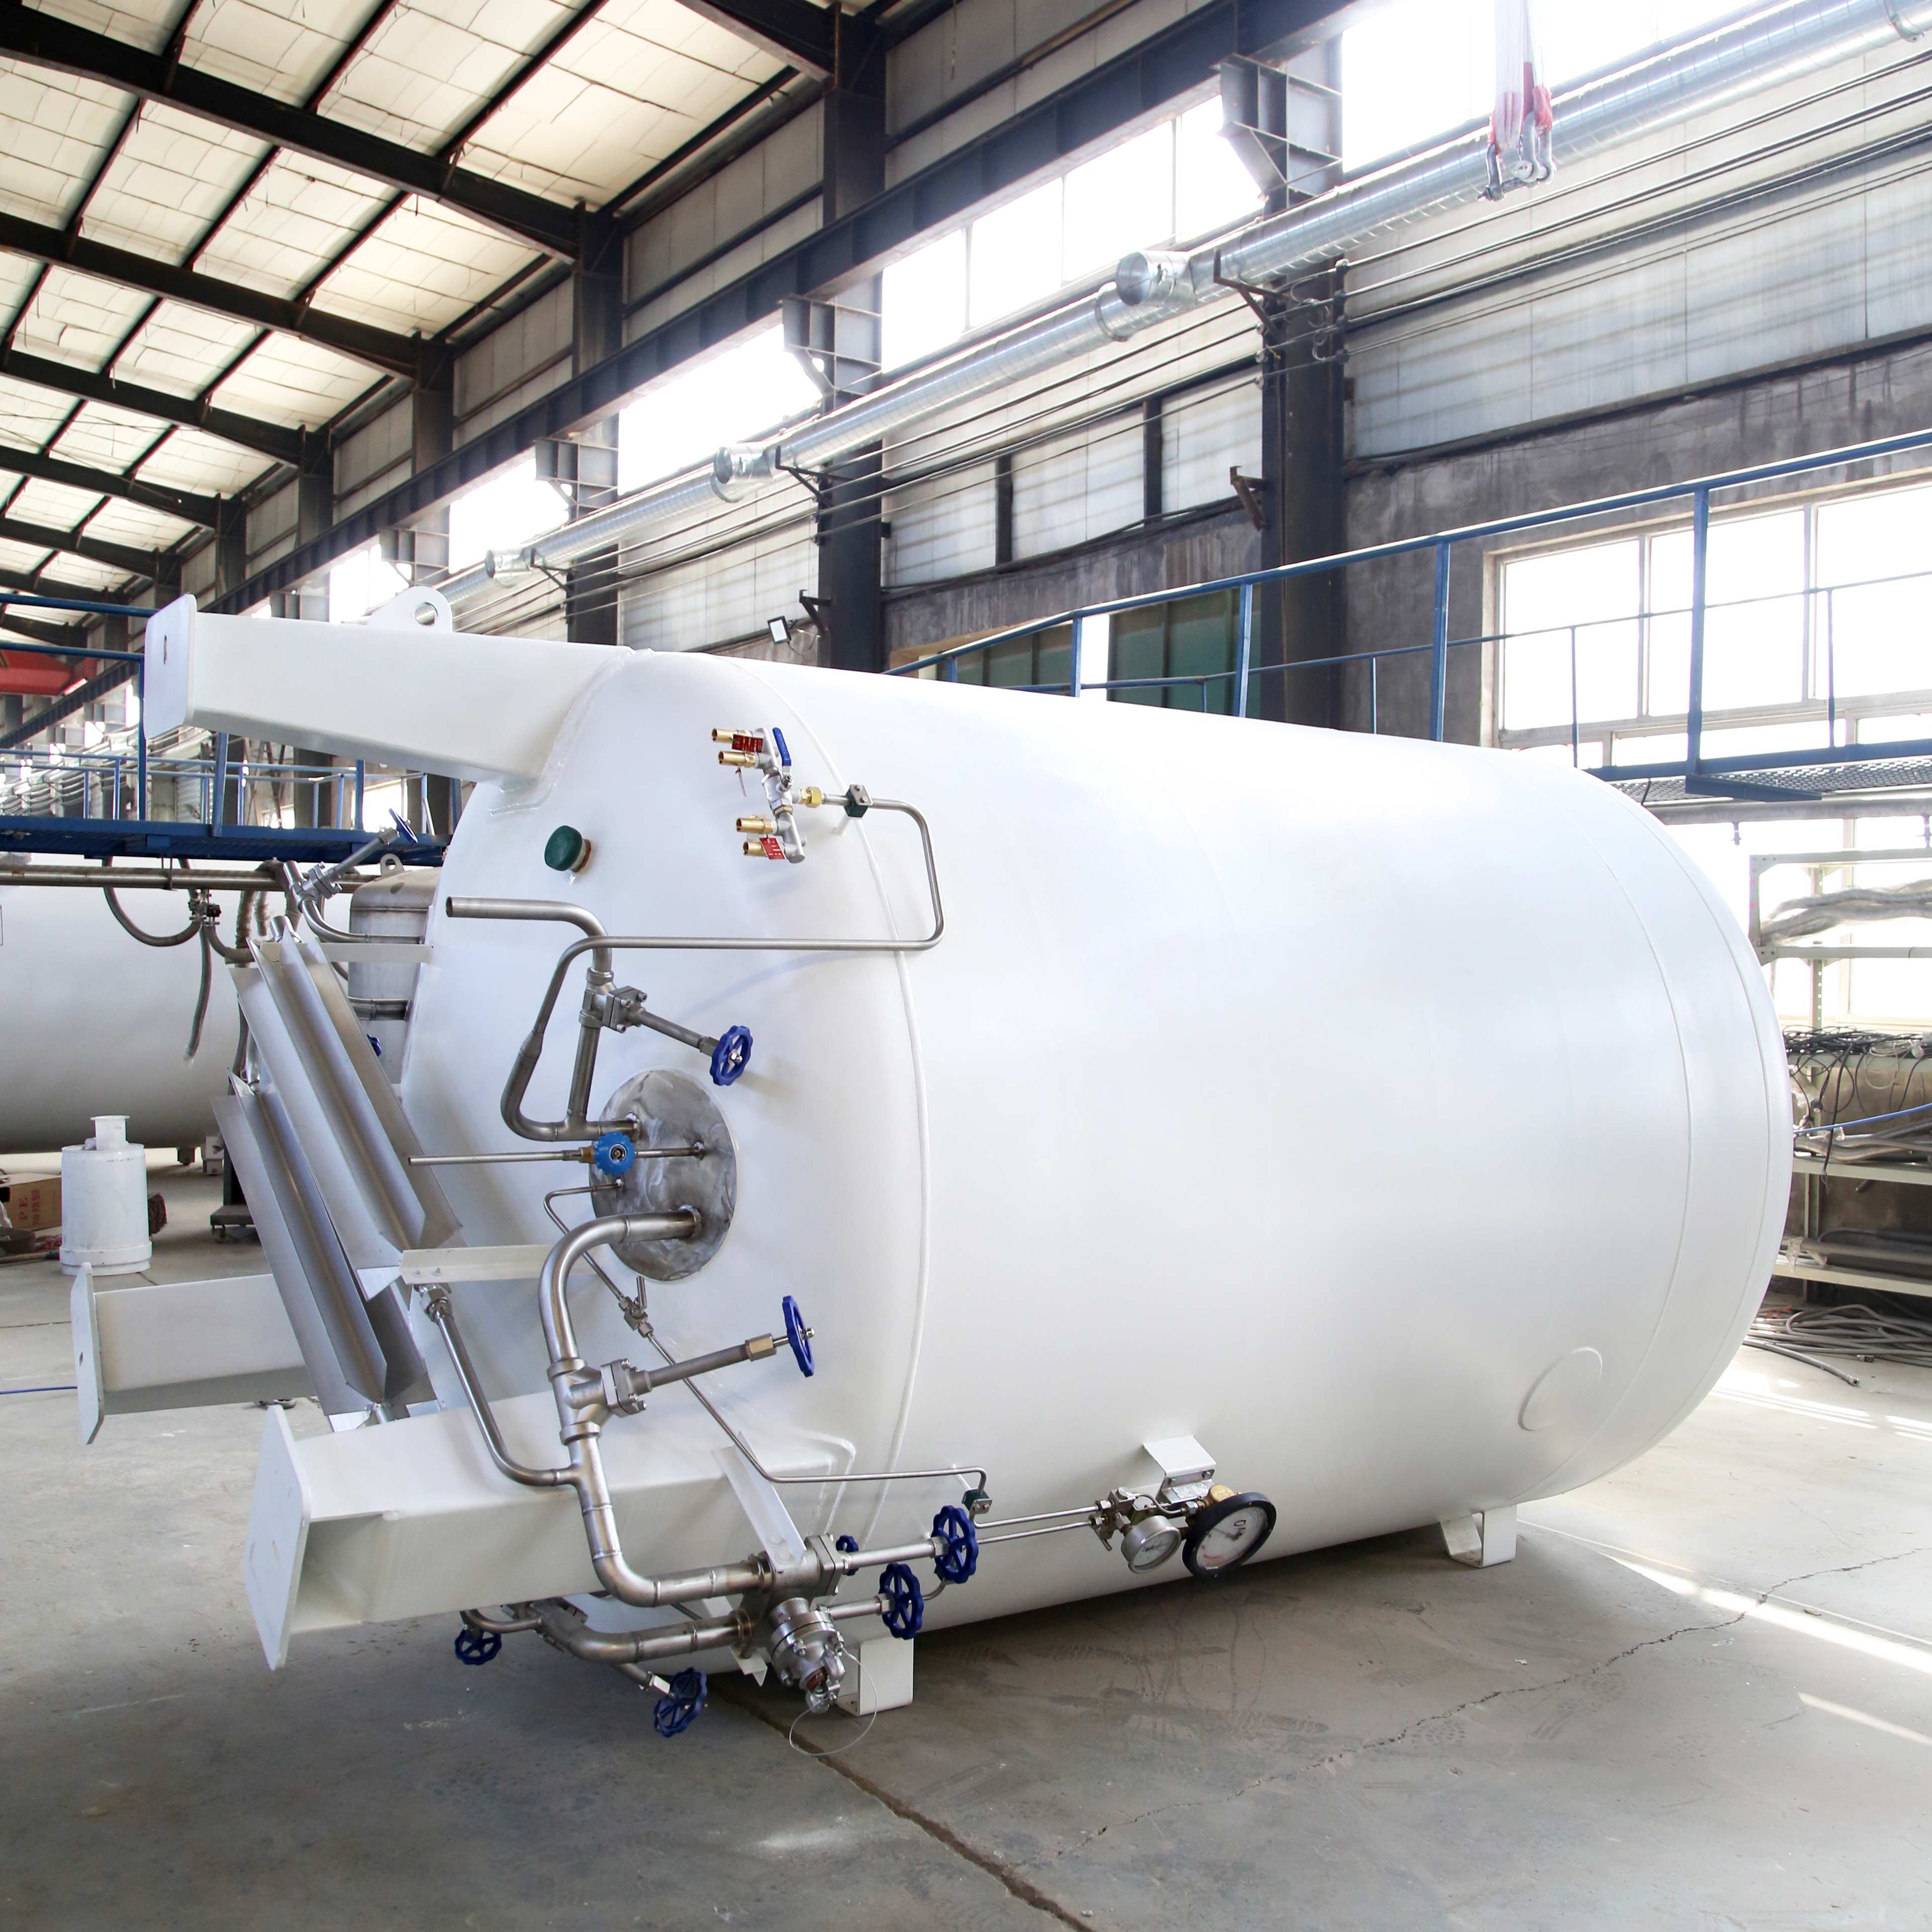 How to prevent static electricity in cryogenic storage tanks?